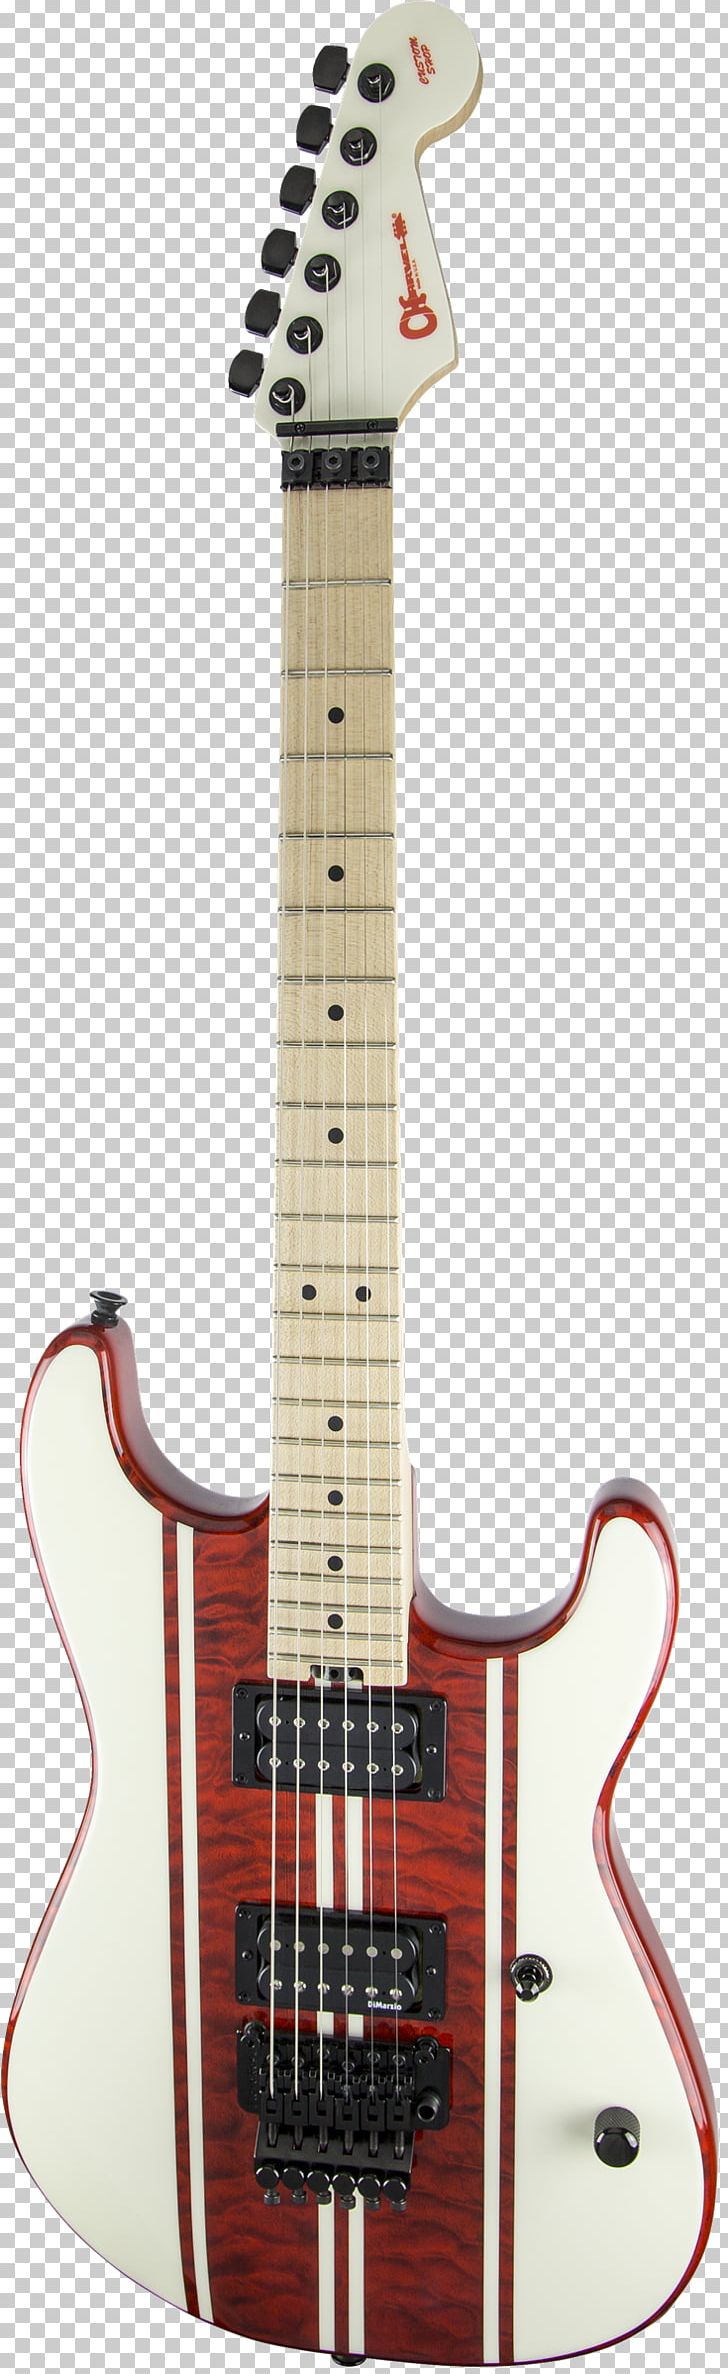 Bass Guitar Electric Guitar Acoustic Guitar Fender Musical Instruments Corporation Fender Stratocaster PNG, Clipart, Acoustic Electric Guitar, Acoustic Guitar, Fender Telecaster, Floyd Rose, Guitar Free PNG Download